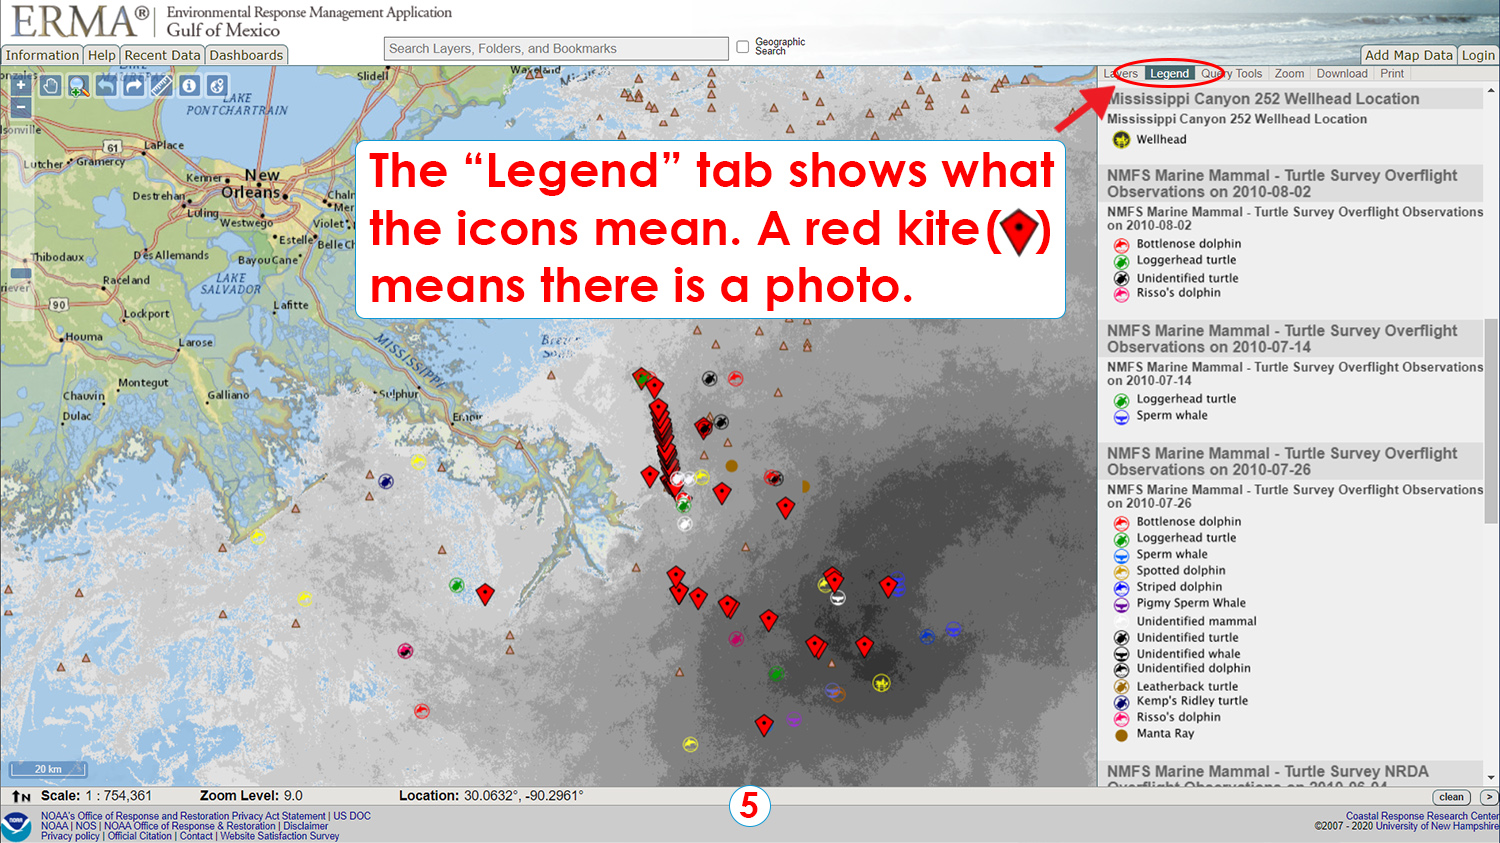 Step 5: The "Legend" tab shows what the icons mean. A red kite (red diamond shape with a black dot in the center) means there is a photo. 